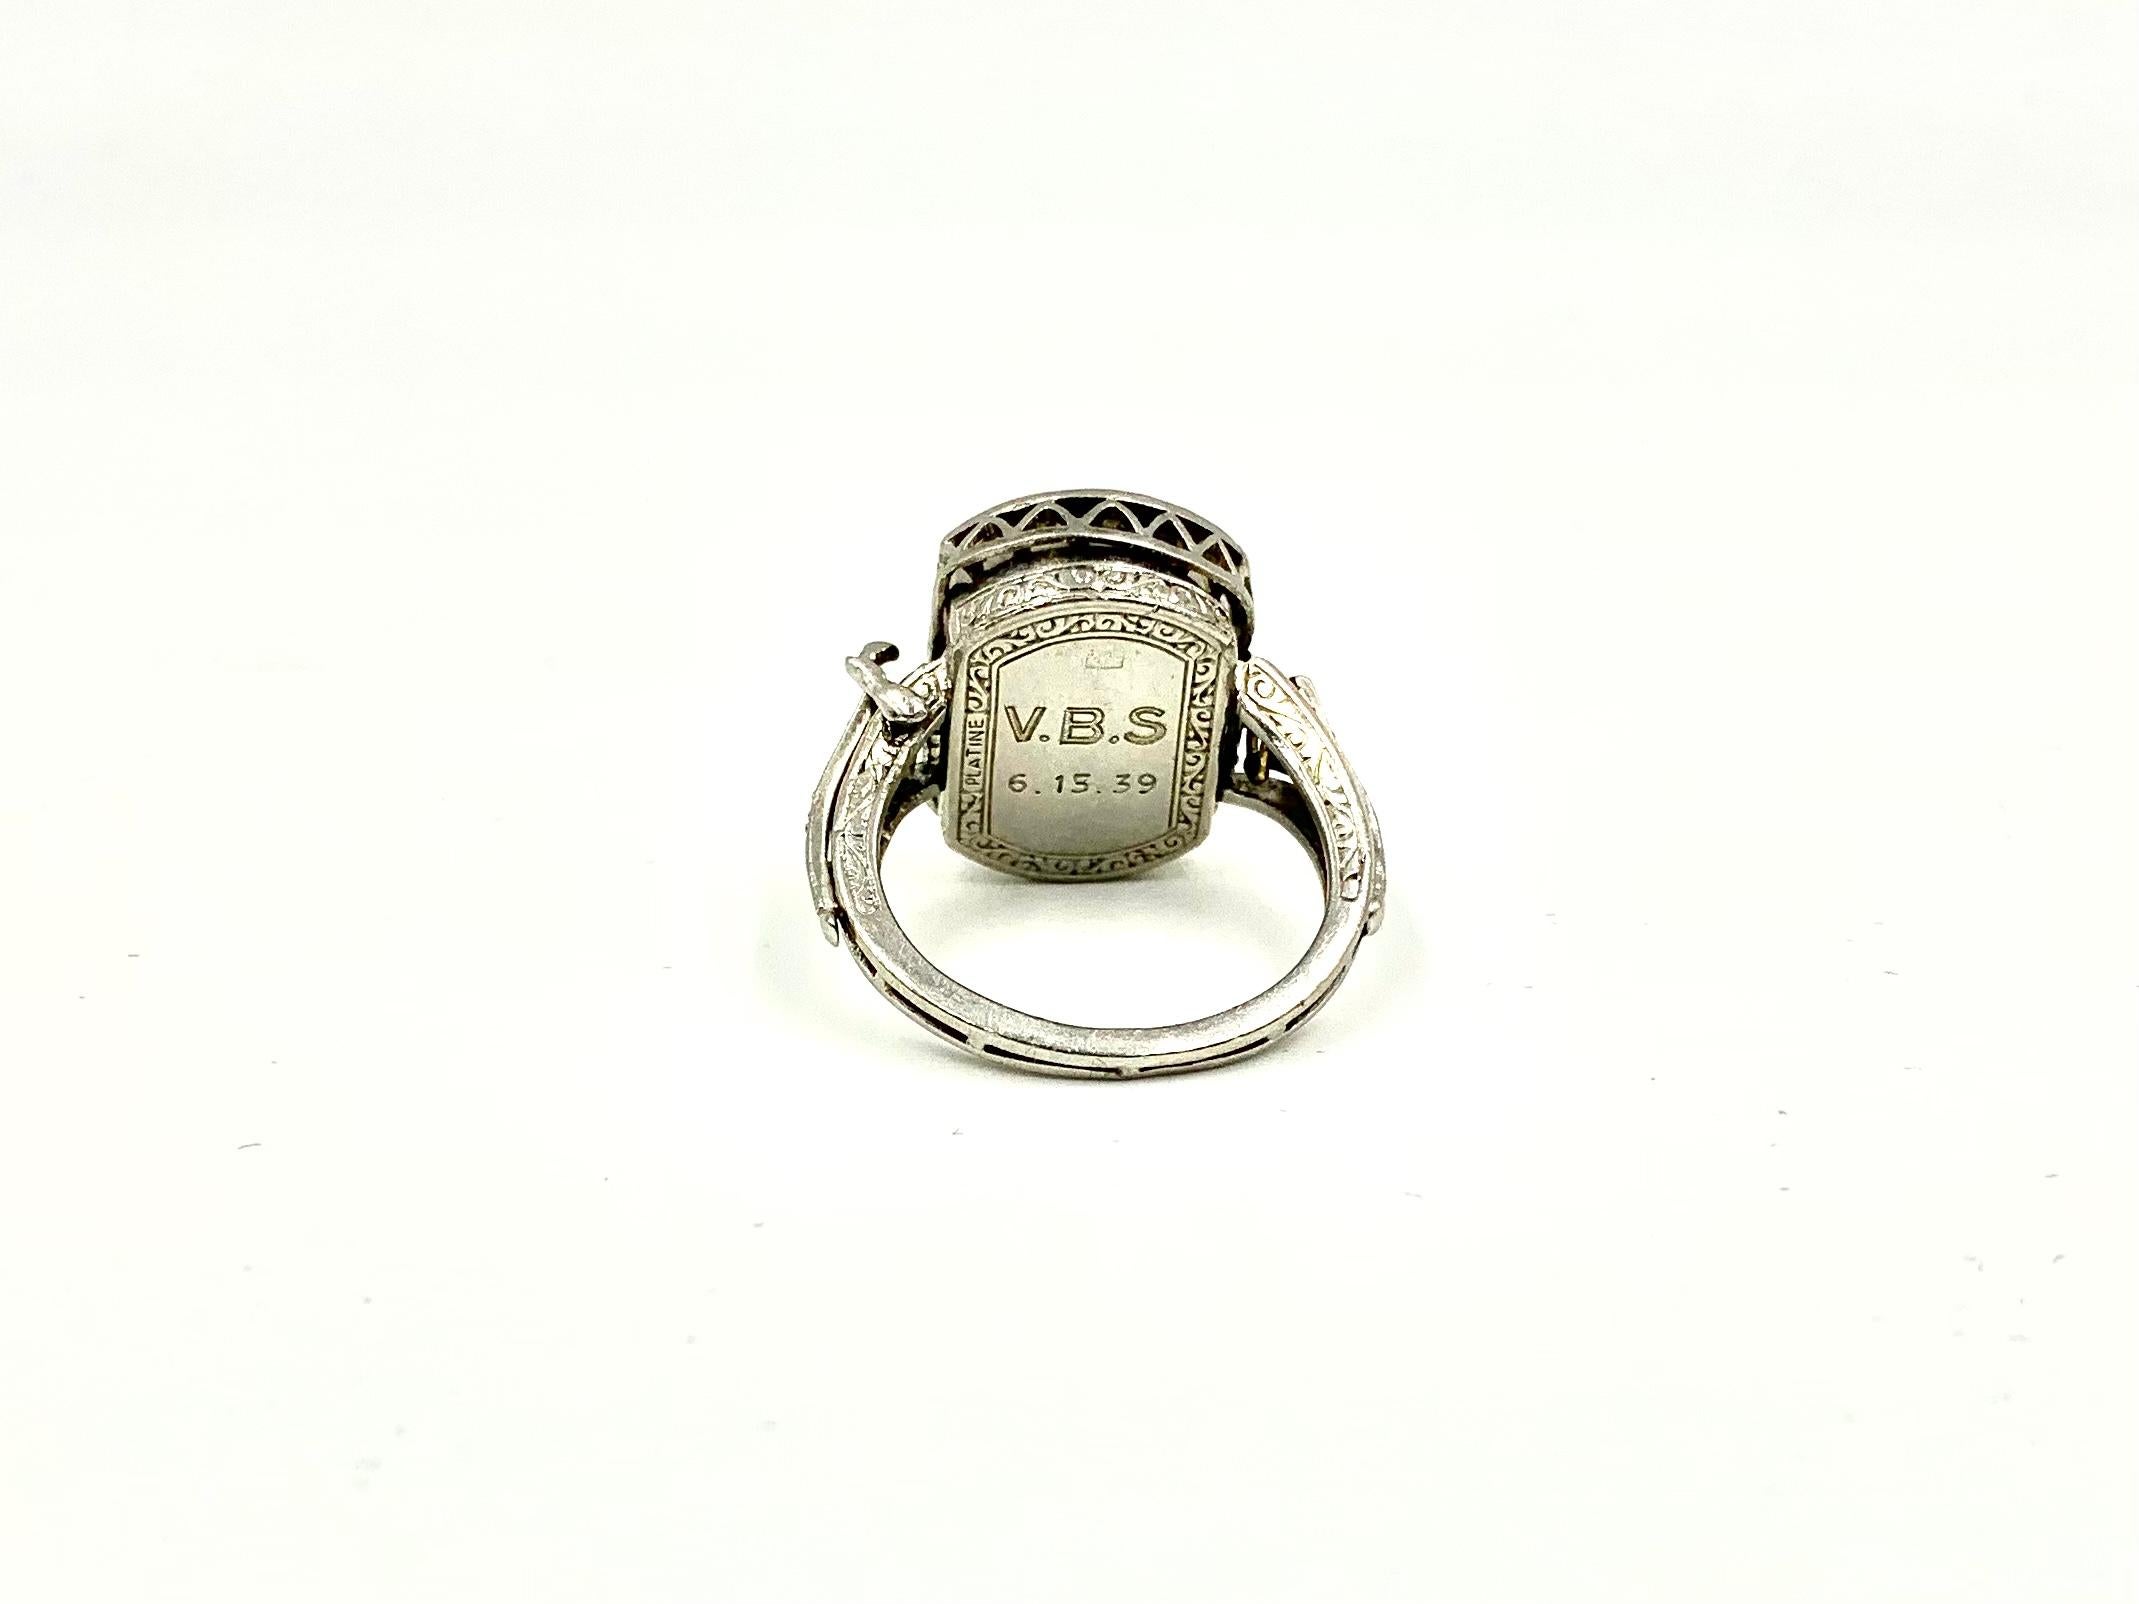 Rare Art Deco 2.30 TCW Diamond 14K White Gold Cocktail Ring with Concealed Watch For Sale 3